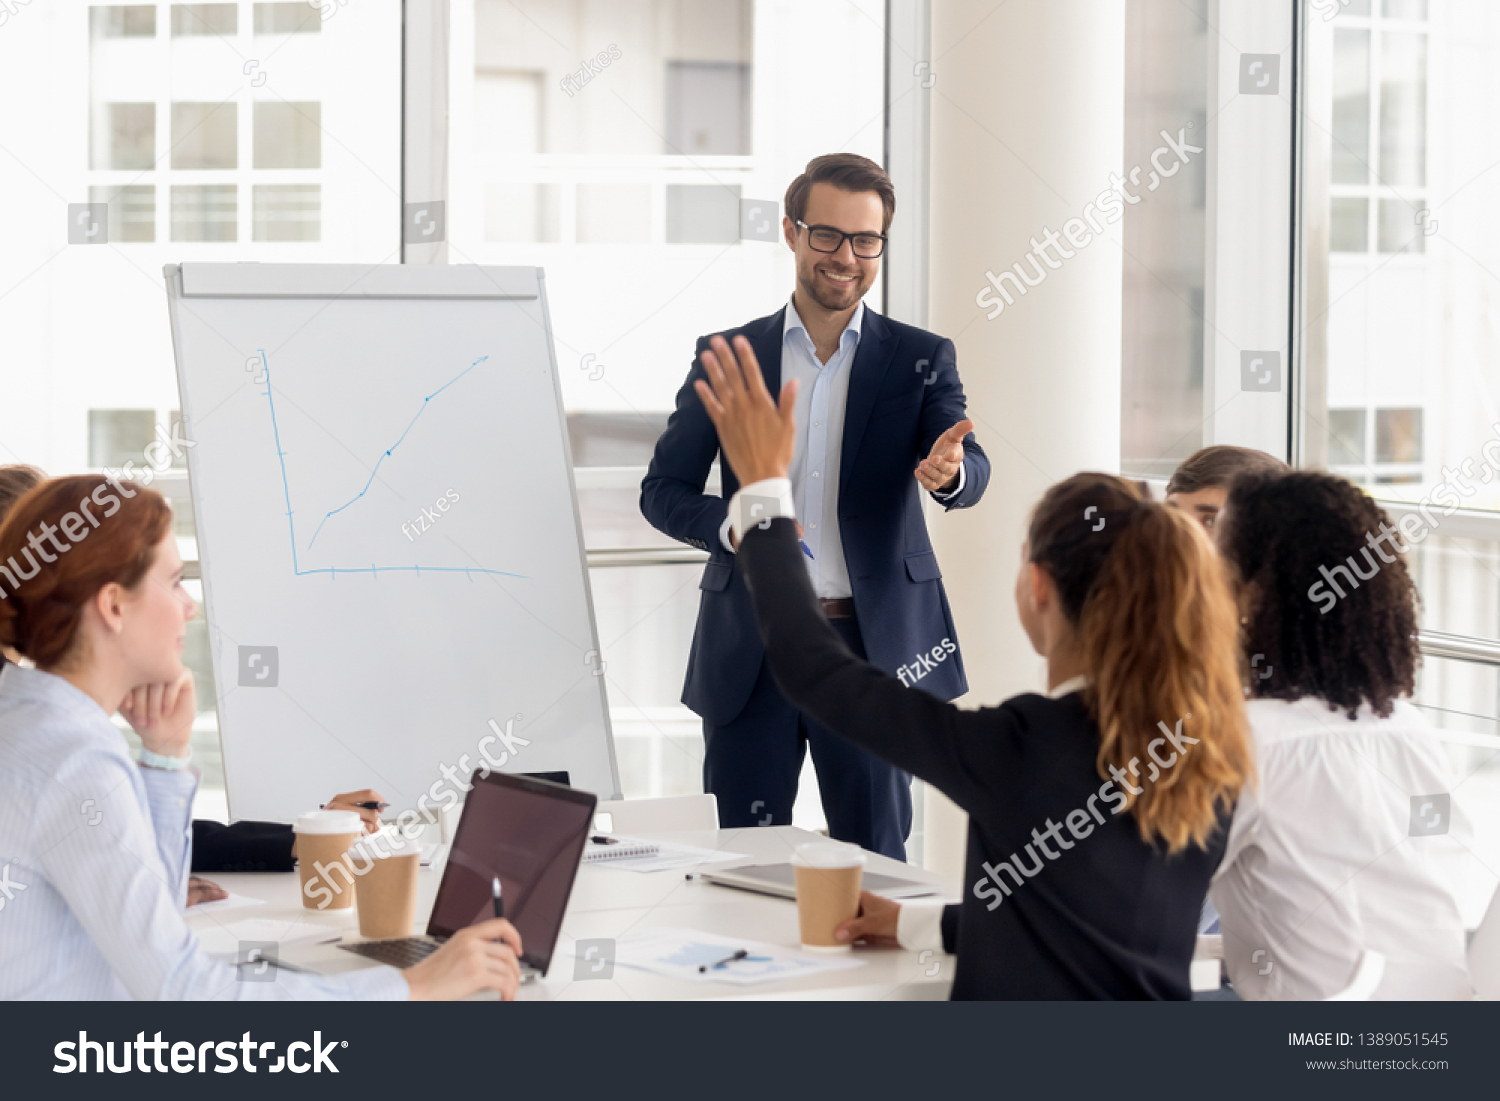 Smiling millennial male coach or presenter make flip chart presentation ask question during work training, motivated confident female employee raise hand answer engaged in teamwork at seminar #1389051545